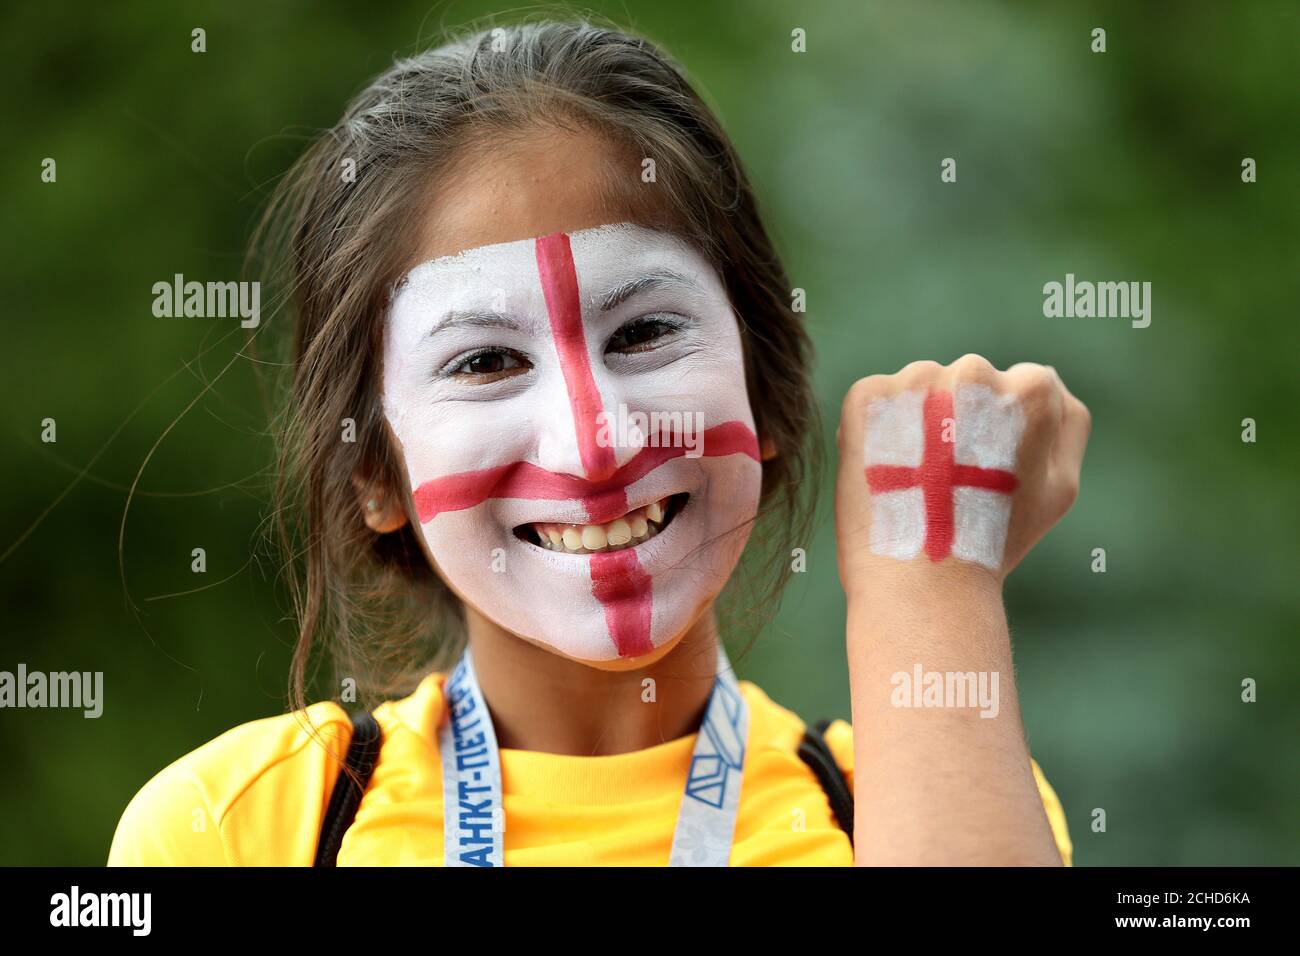 An England fan wears face paint of the St George's Cross flag during the FIFA World Cup, Semi Final match at the Luzhniki Stadium, Moscow. Stock Photo